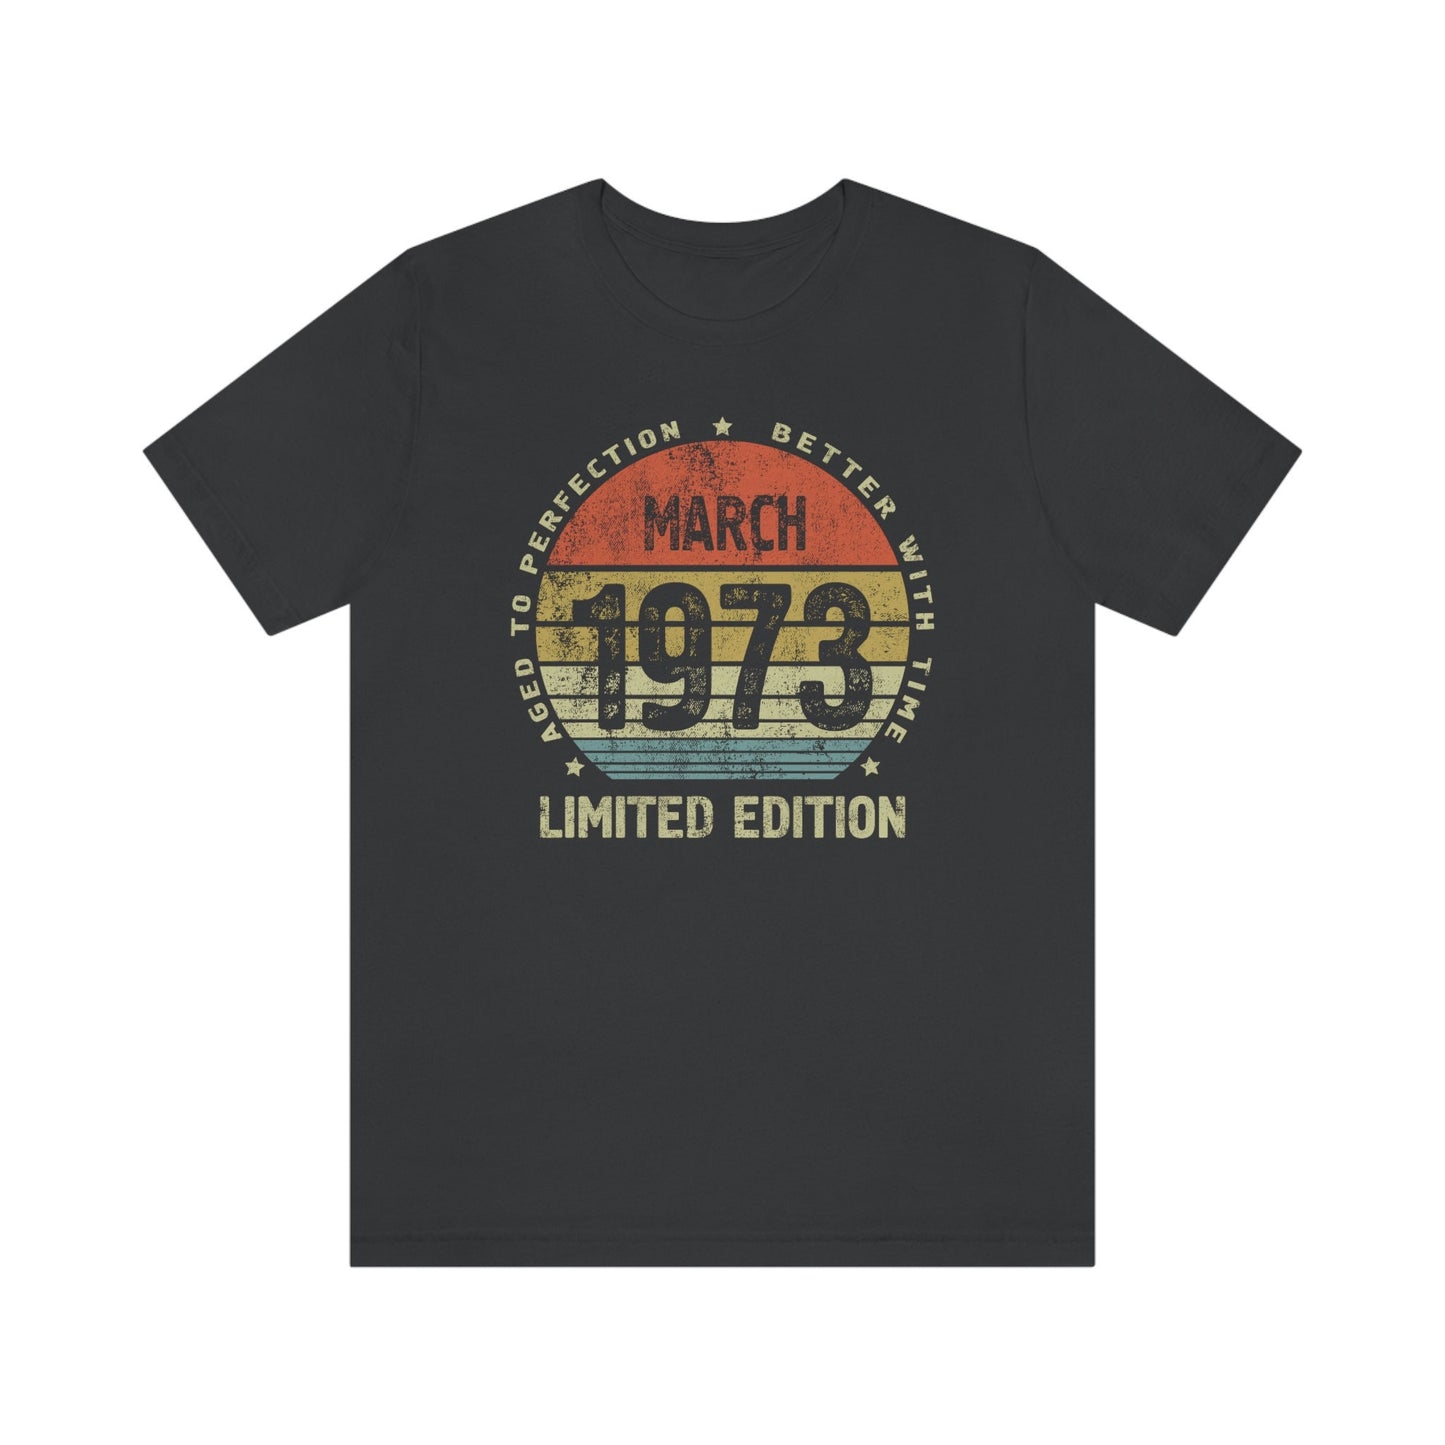 March 1973 birthday shirt for women or men,  Gift shirt for wife or husband